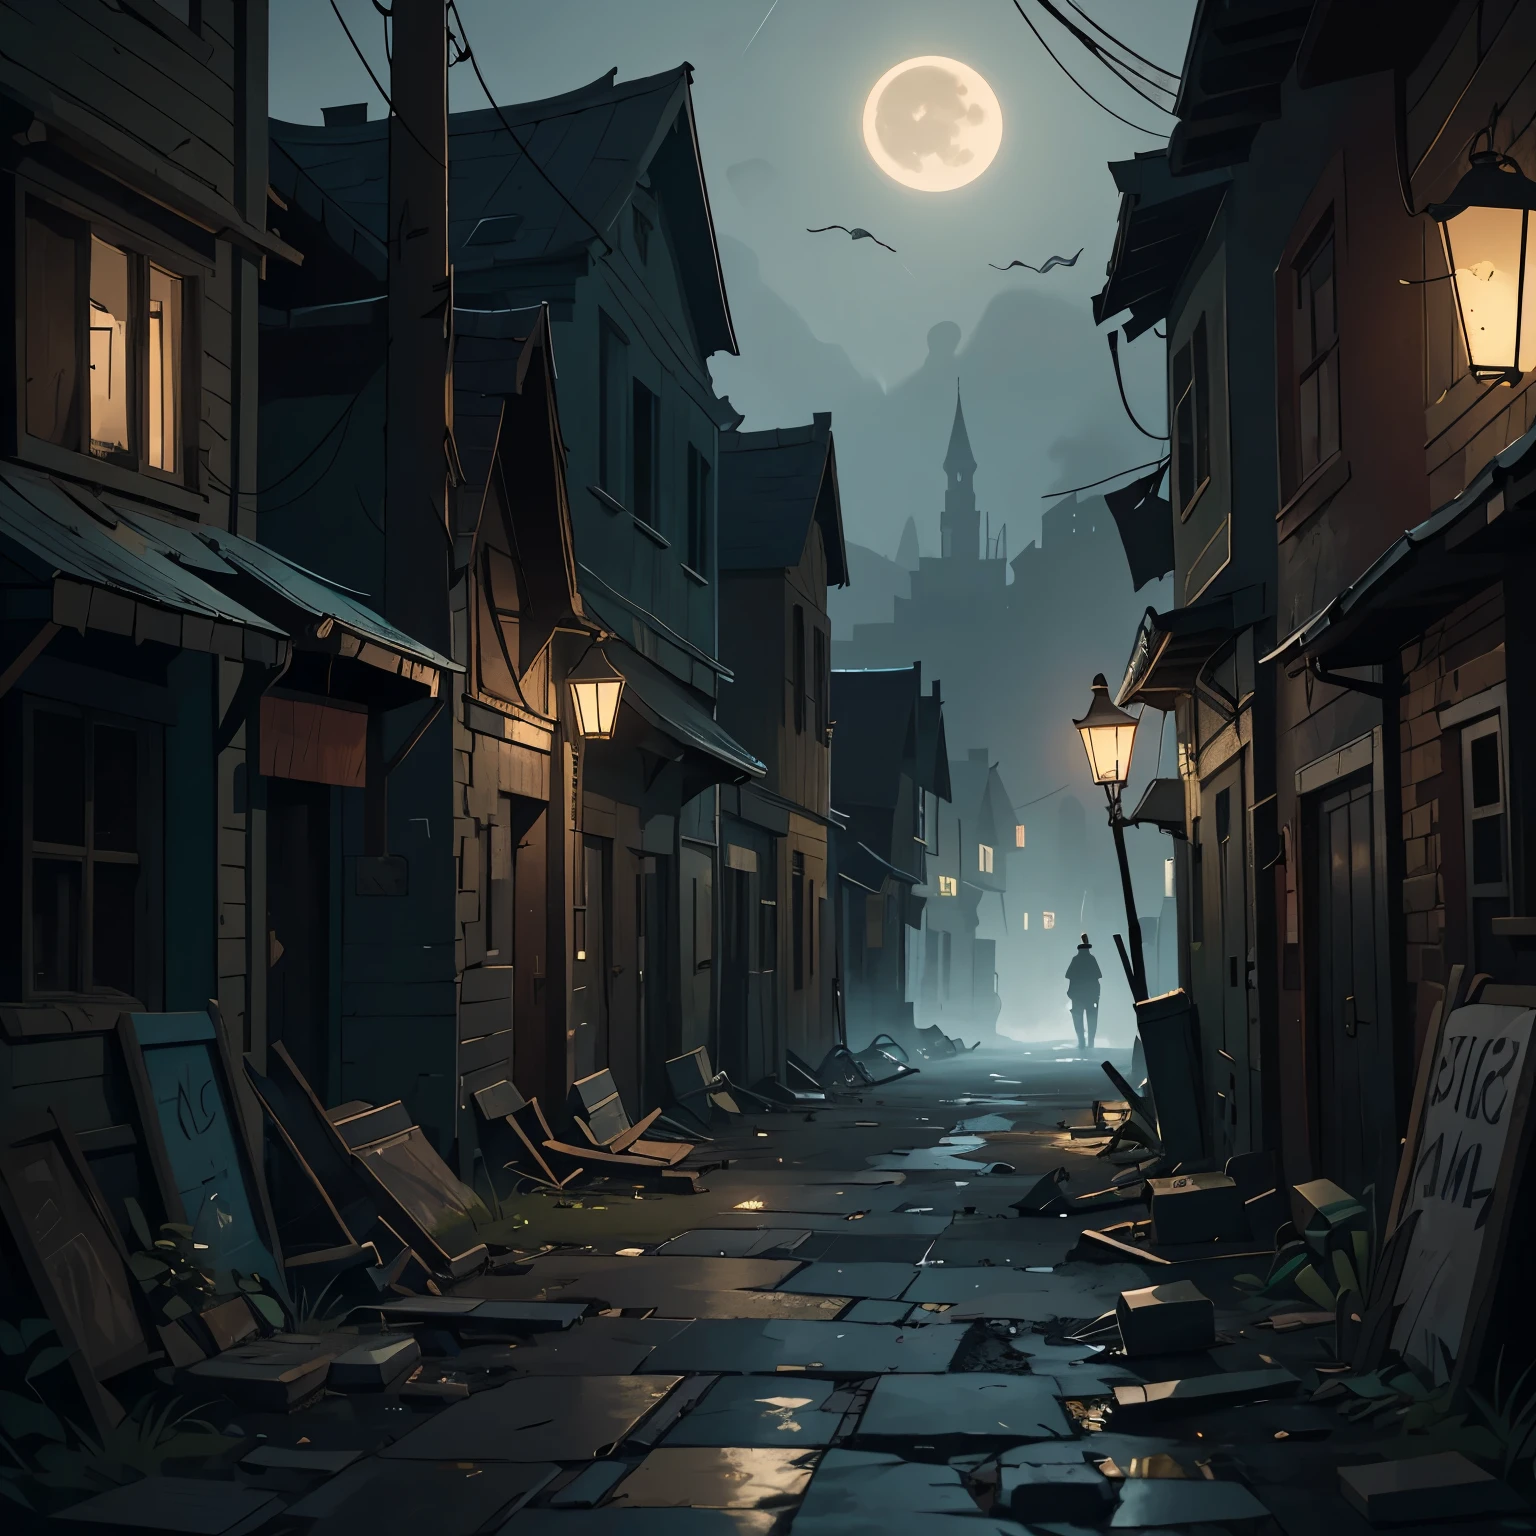 (best quality,highres,ultra-detailed),dark and eerie night scene of neglected streets in small mountain villages, villagers, ancient houses, very detailed and realistic portrayal, with a sense of despair and neglect. The scene is bathed in a somber and terrifying atmosphere, filled with shadows, and a lack of proper care. The streets are lined with worn-out cobblestones, the houses show signs of decay, and the overall ambiance is haunting. The villagers can be seen wandering the streets with tired expressions, wearing tattered clothes, and their eyes reflecting a sense of hopelessness. The moon casts an ominous glow on the scene, illuminating the dilapidated buildings and highlighting the emptiness and neglect. The color palette consists of deep, muted tones, with hints of blues and grays, conveying the desolation and abandonment of the place. The lighting is low and contrasts sharply with the few flickering streetlights, emphasizing the eerie and mysterious atmosphere.